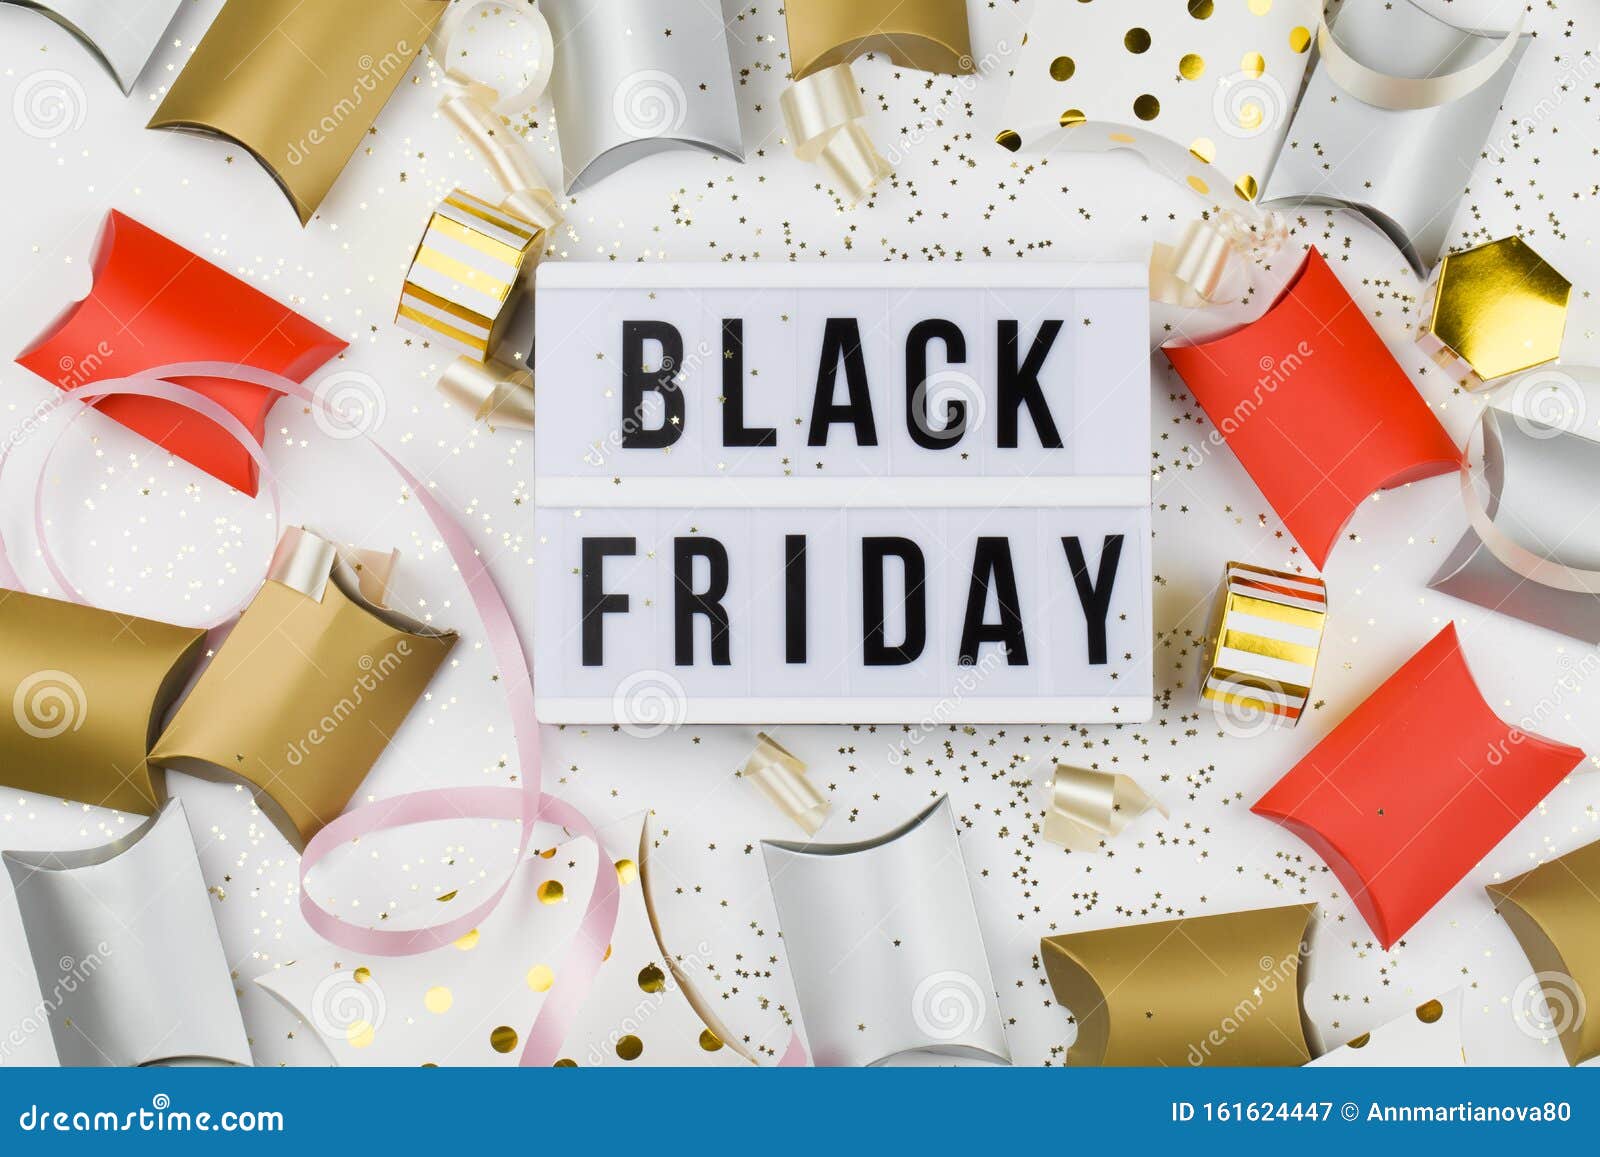 Black Friday Sale Text On White Lightbox, Golden Stars And Packaging ...